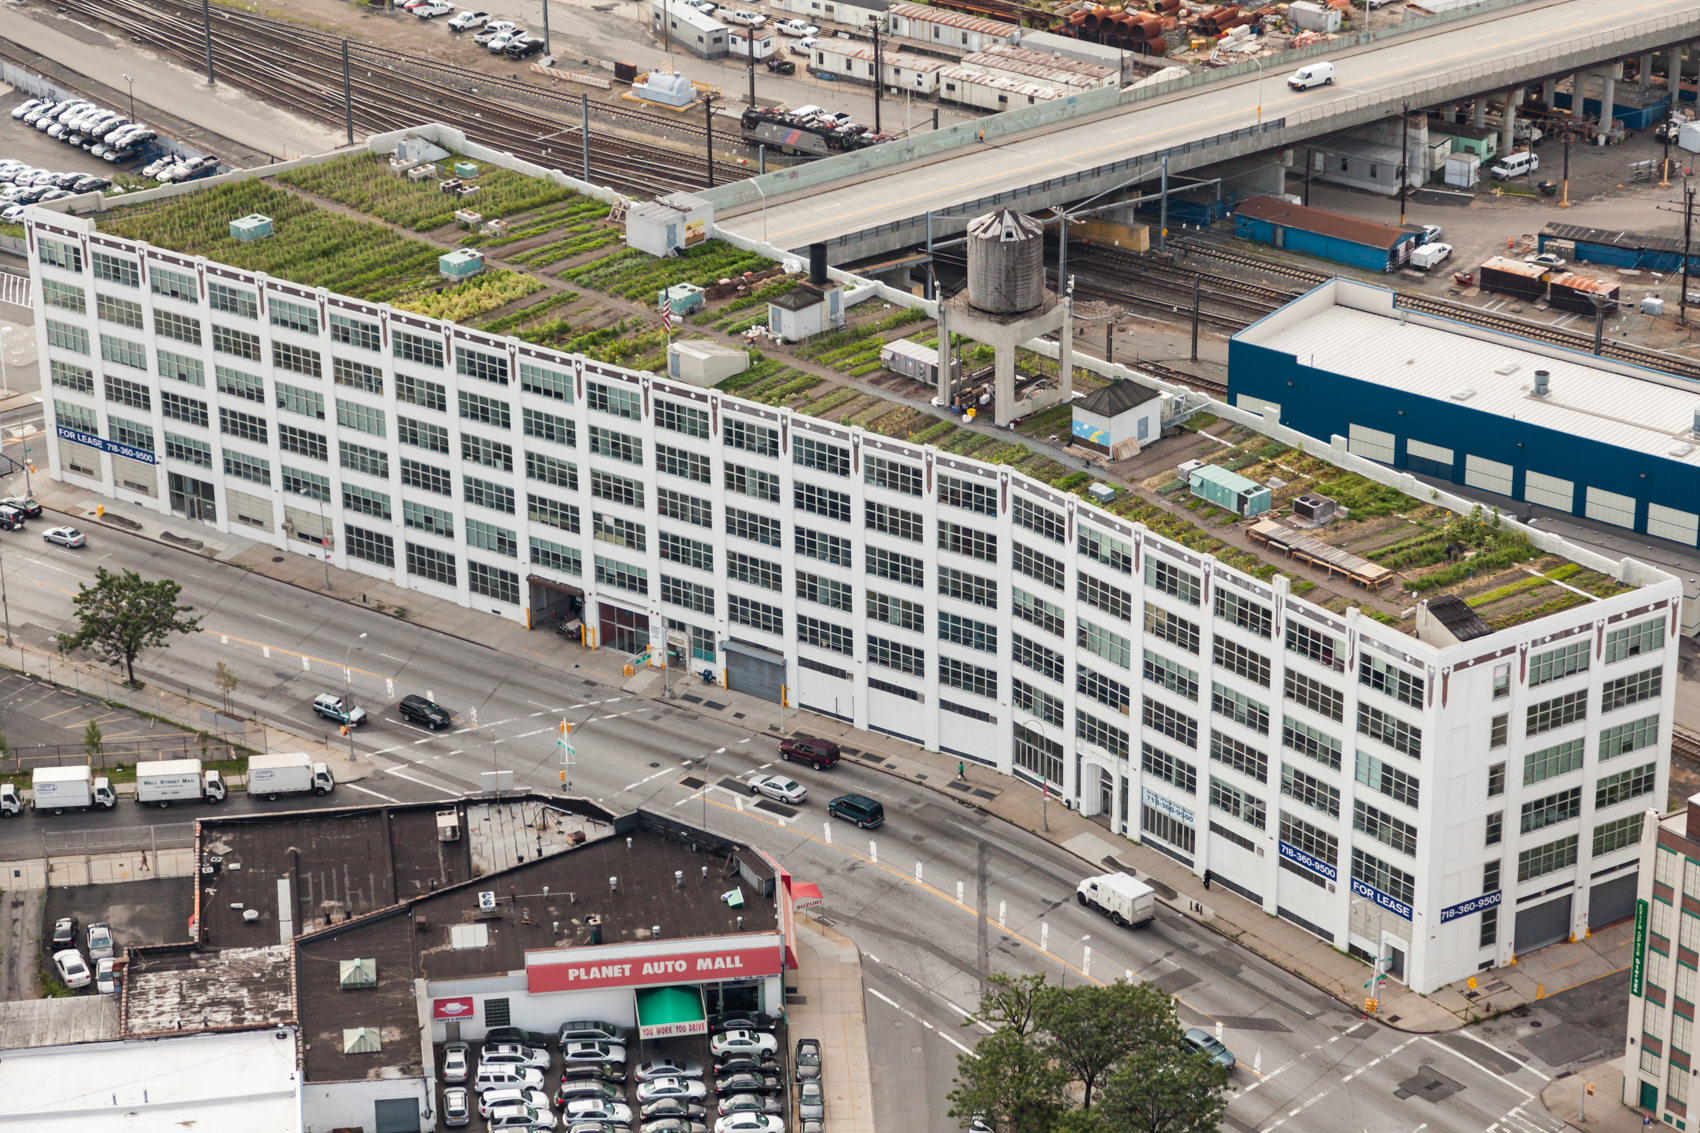 Founded in 2010 and growing 50,000 lbs of produce a year, the Brooklyn Grange operates the world's largest rooftop soil farms, located on two New York rooftops in Brooklyn and Queens.